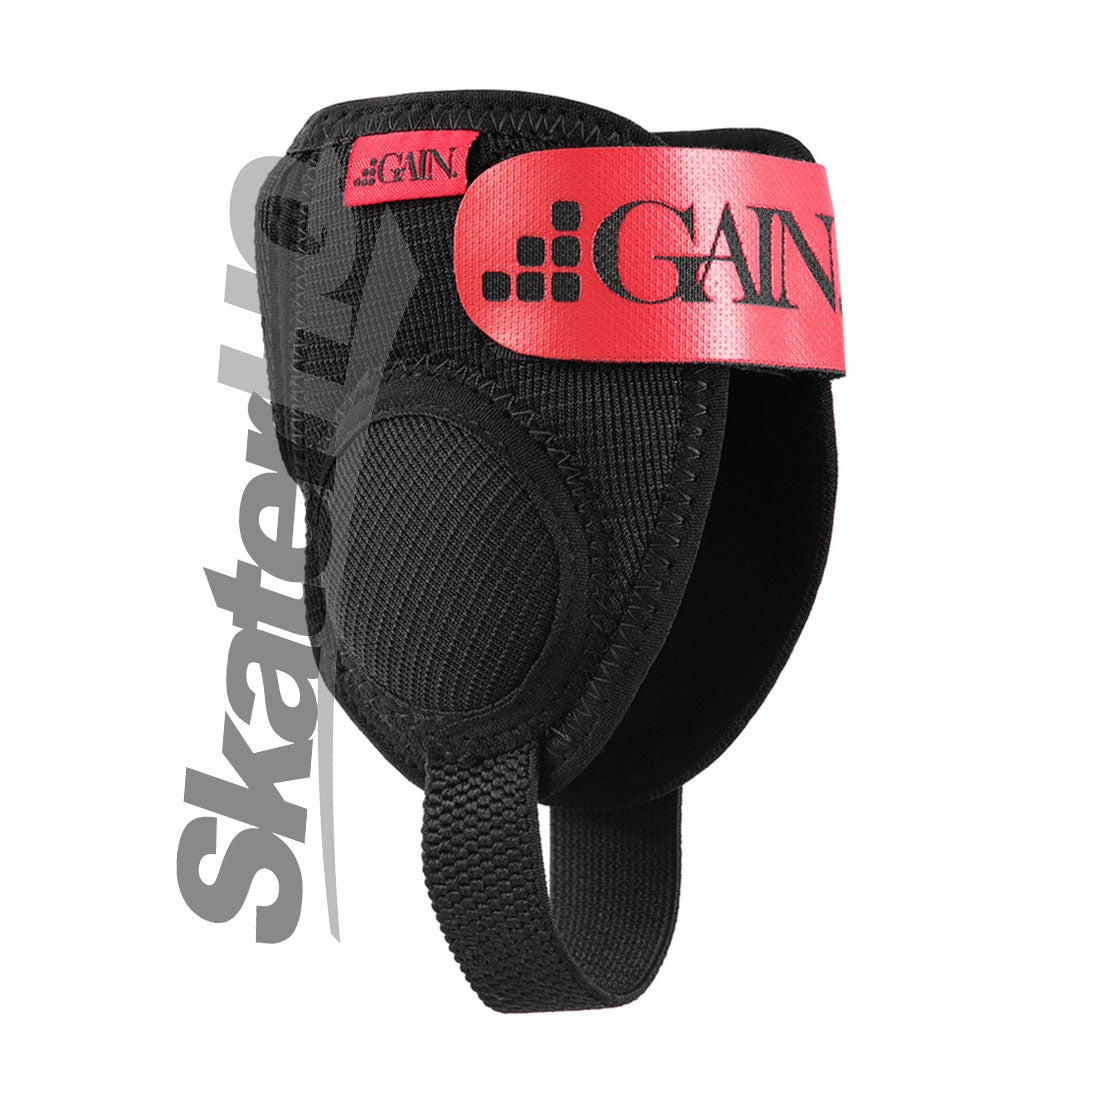 GAIN Pro Ankle Support - Black Protective Gear